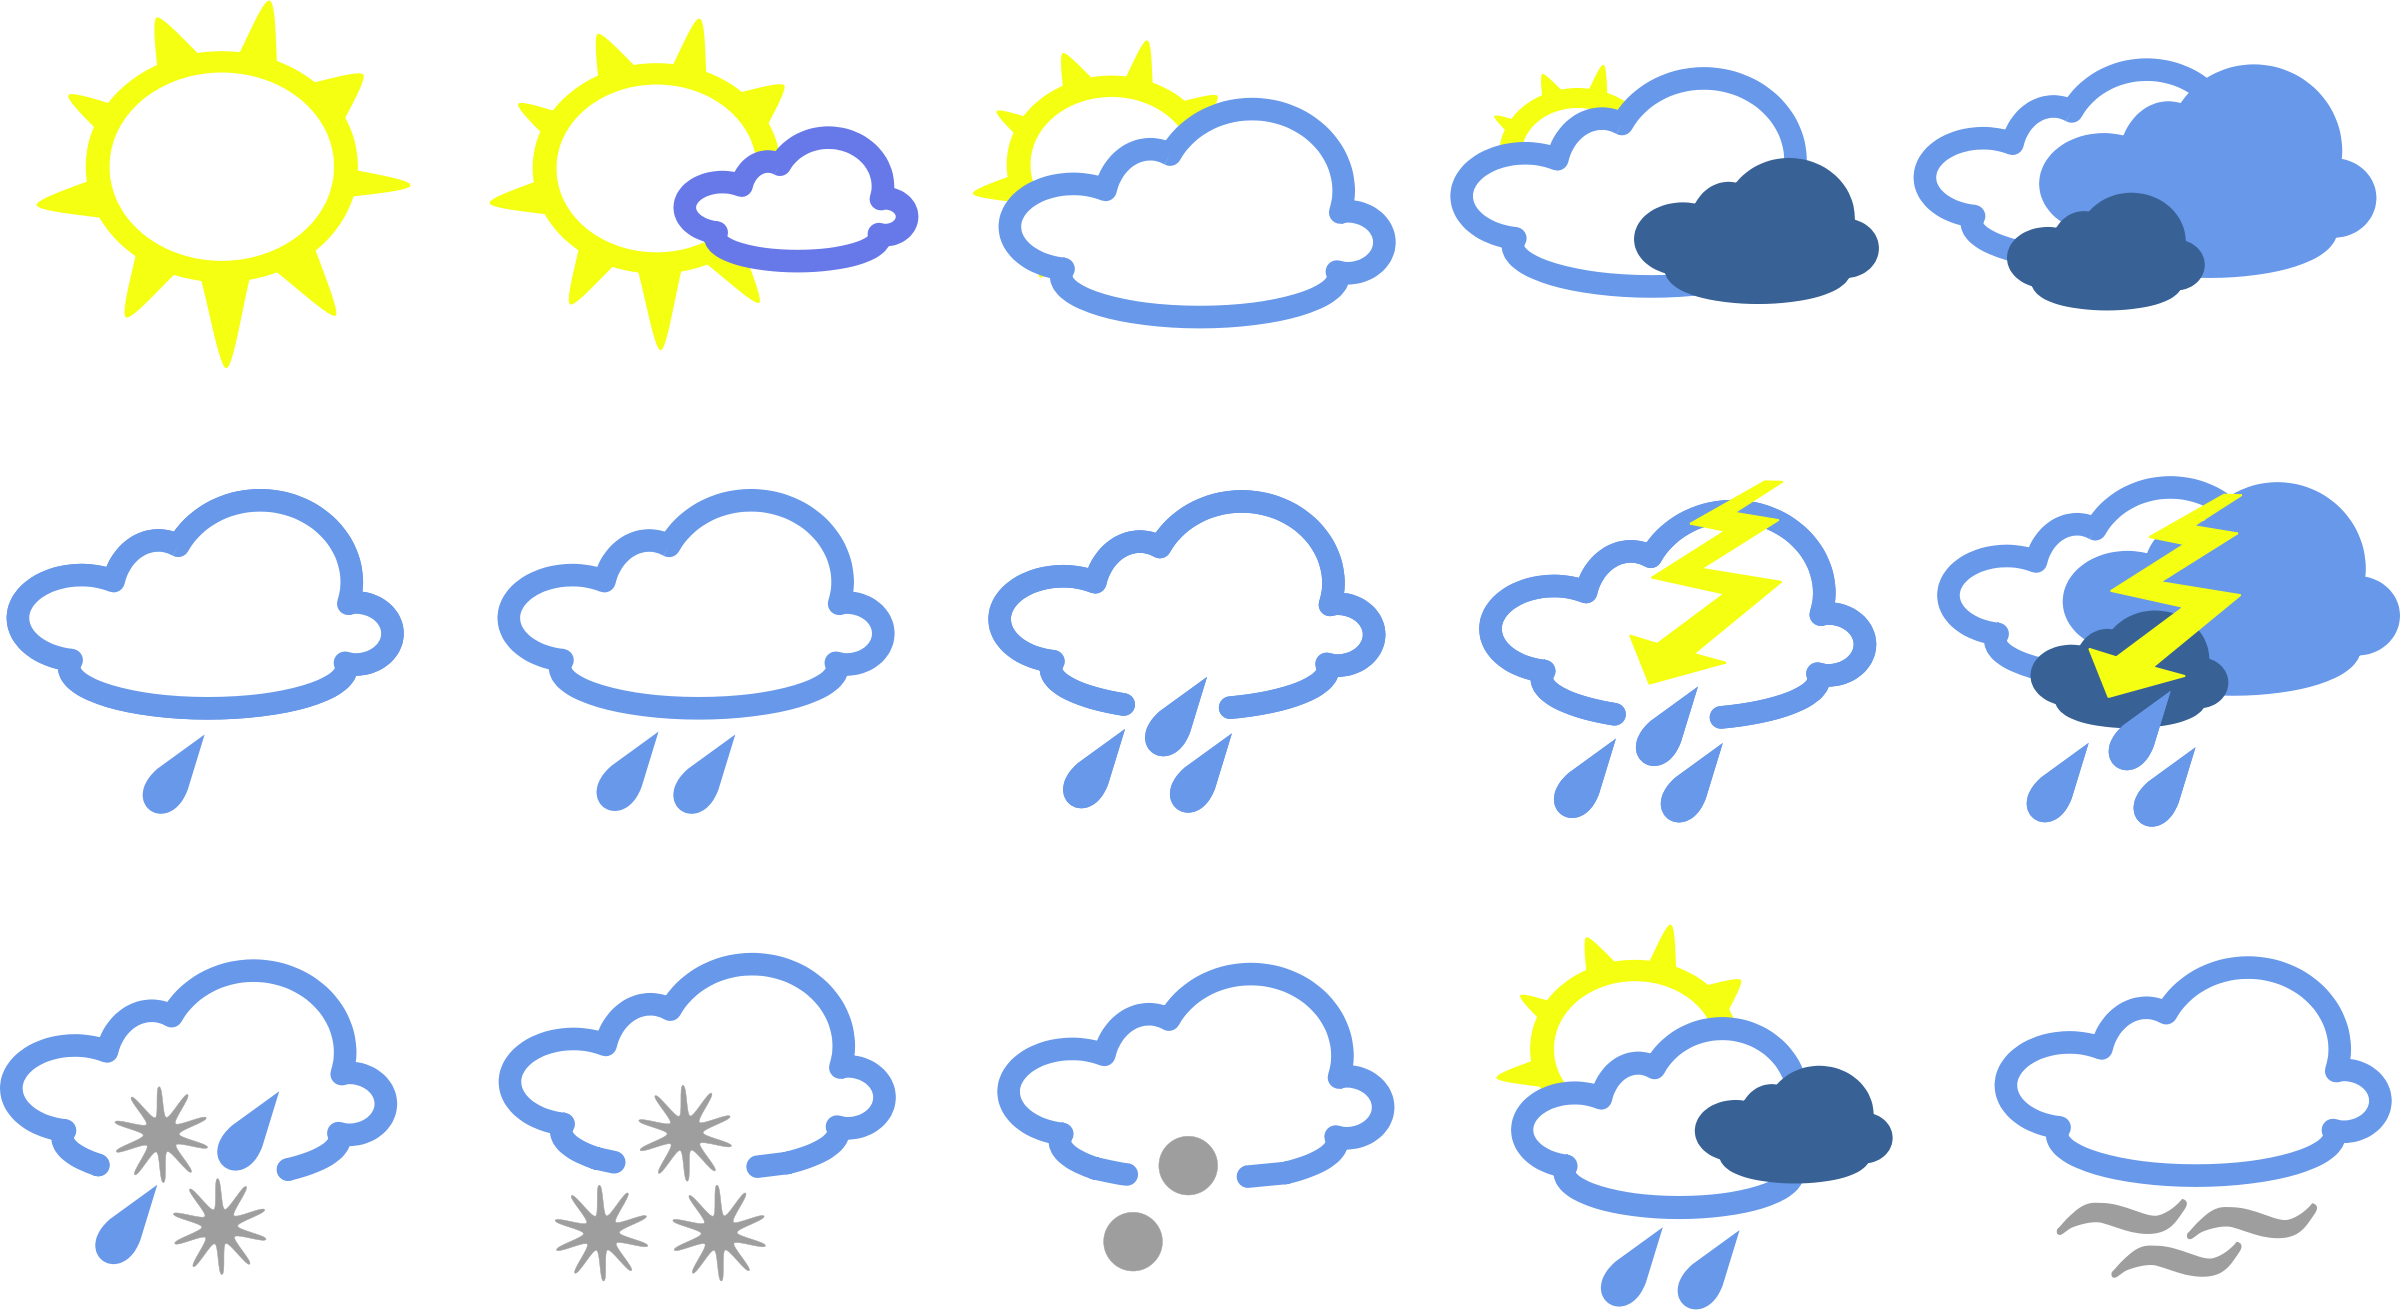 Weather Symbol Cloudy With Rain - ClipArt Best